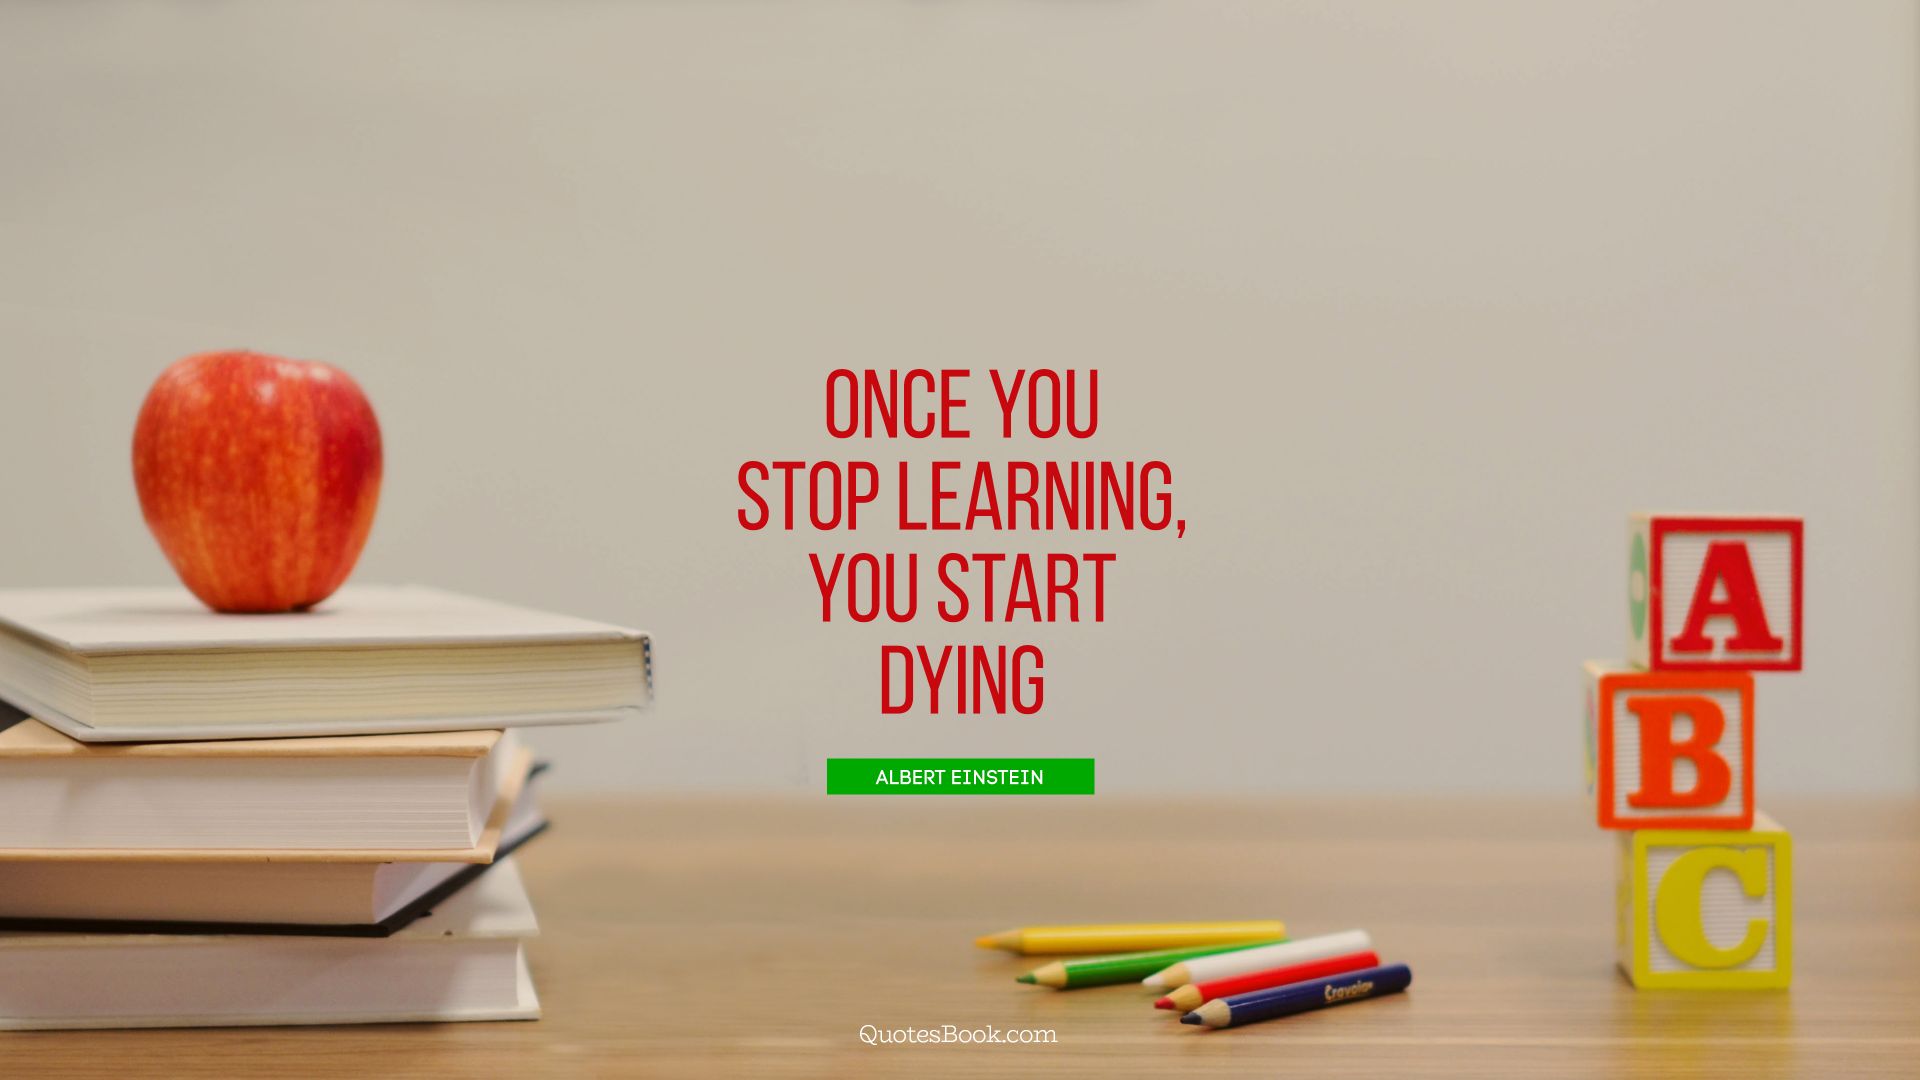 Once you stop learning, you start dying. - Quote by Albert Einstein